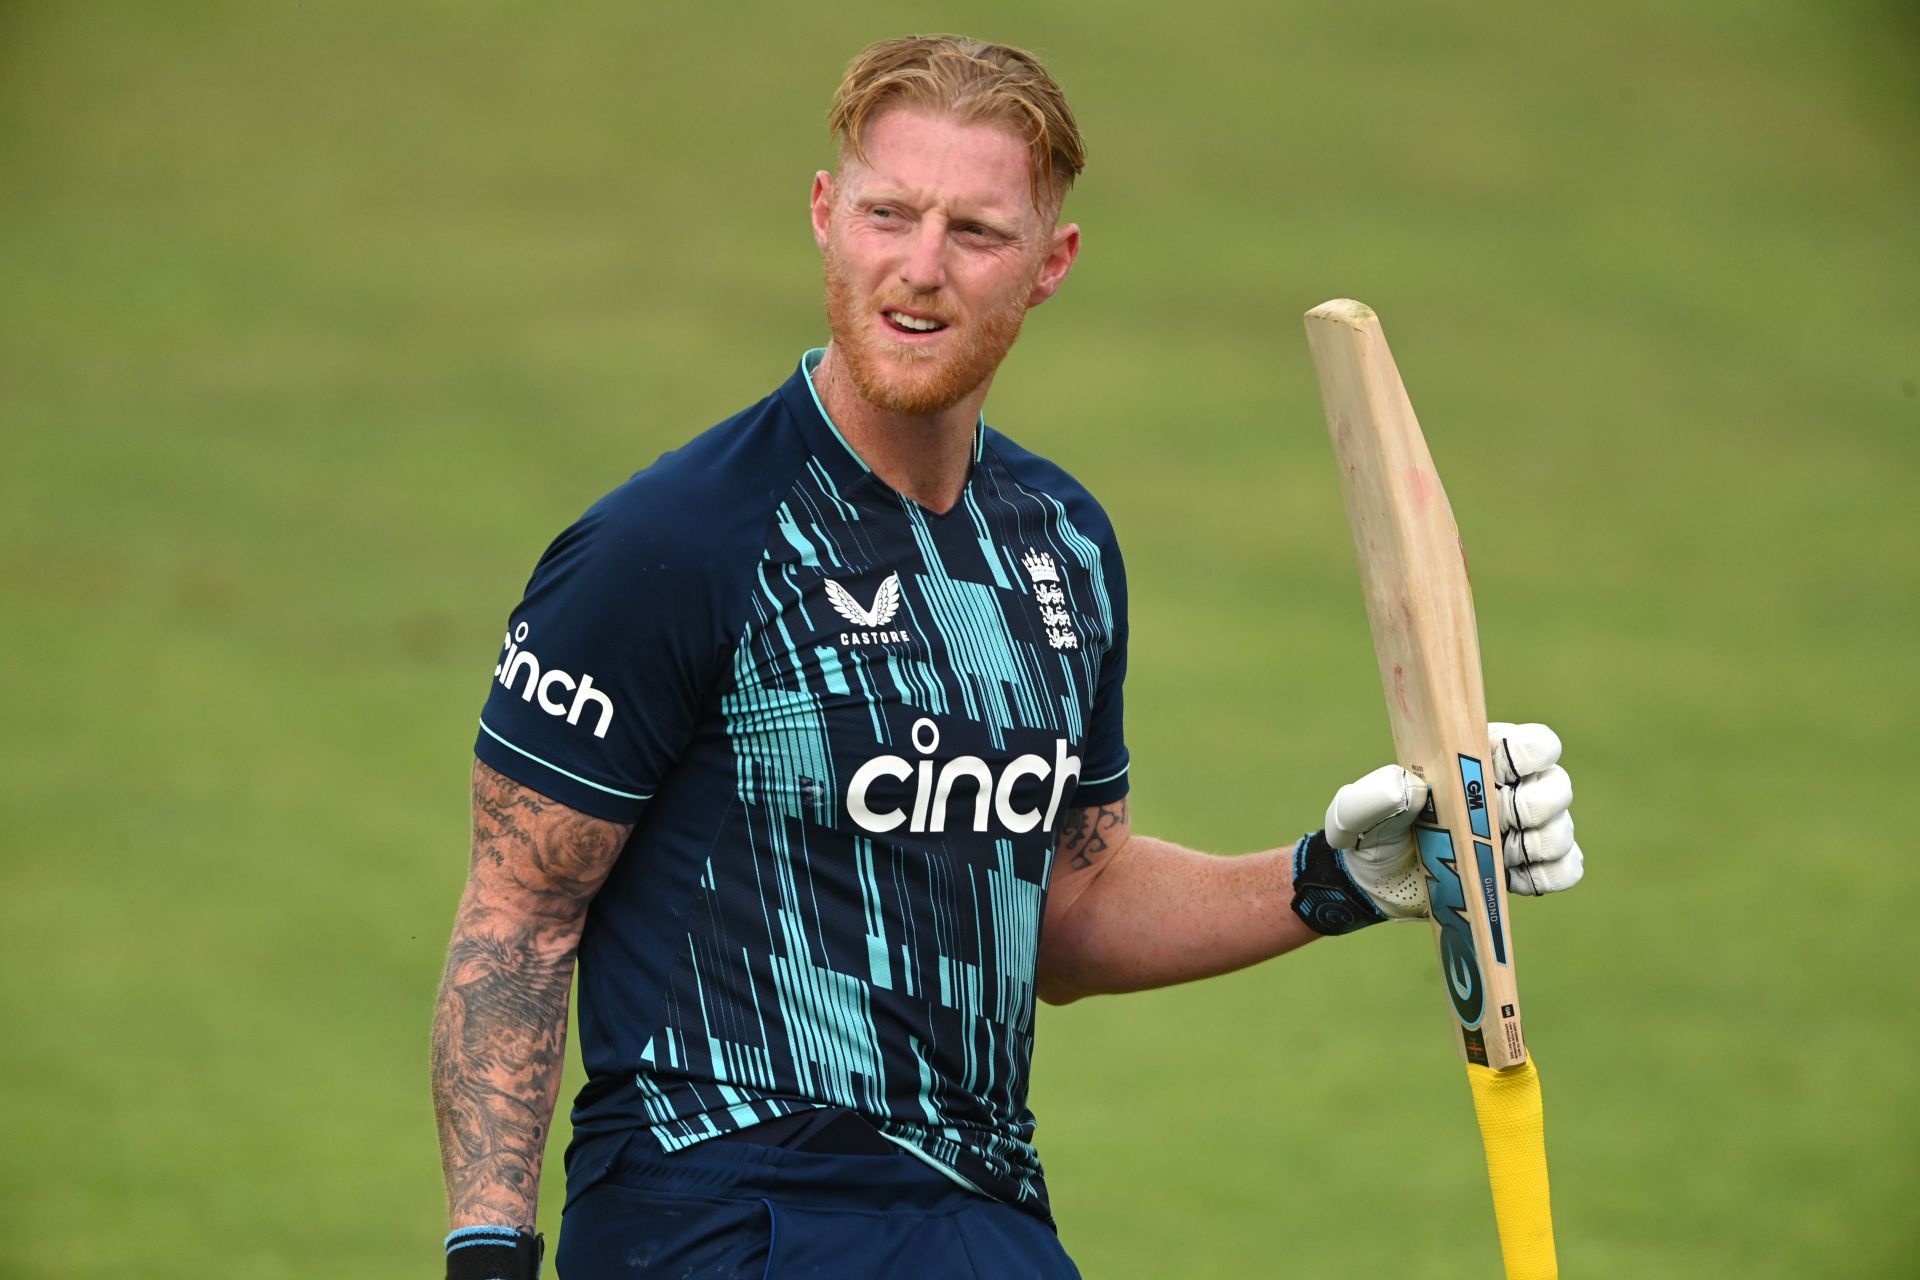 A documentary on Ben Stokes is set to be released